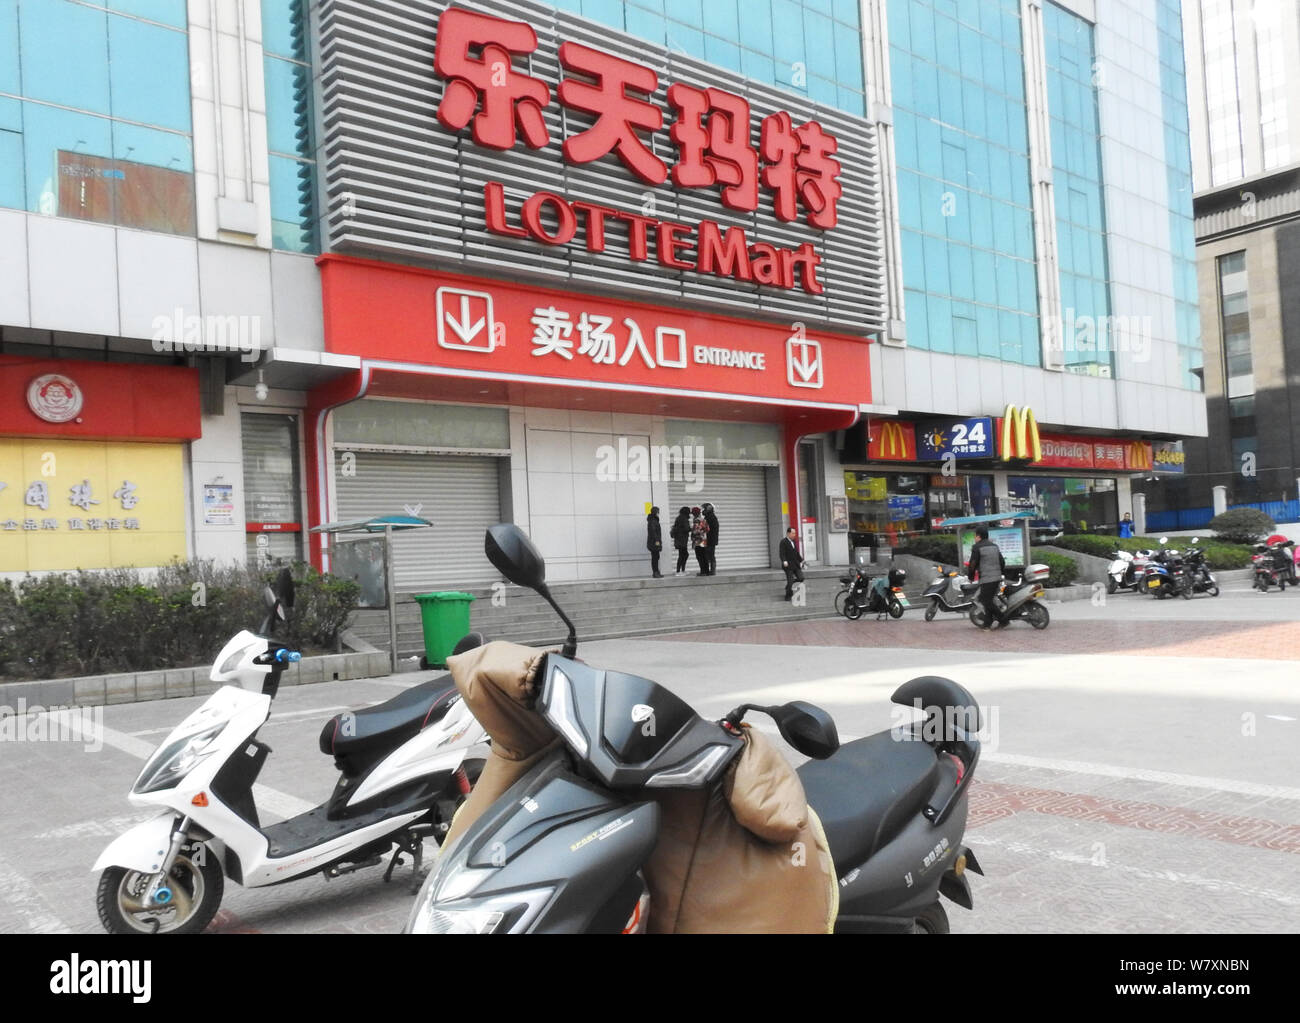 Page 2 - Lotte Mart High Resolution Stock Photography and Images - Alamy